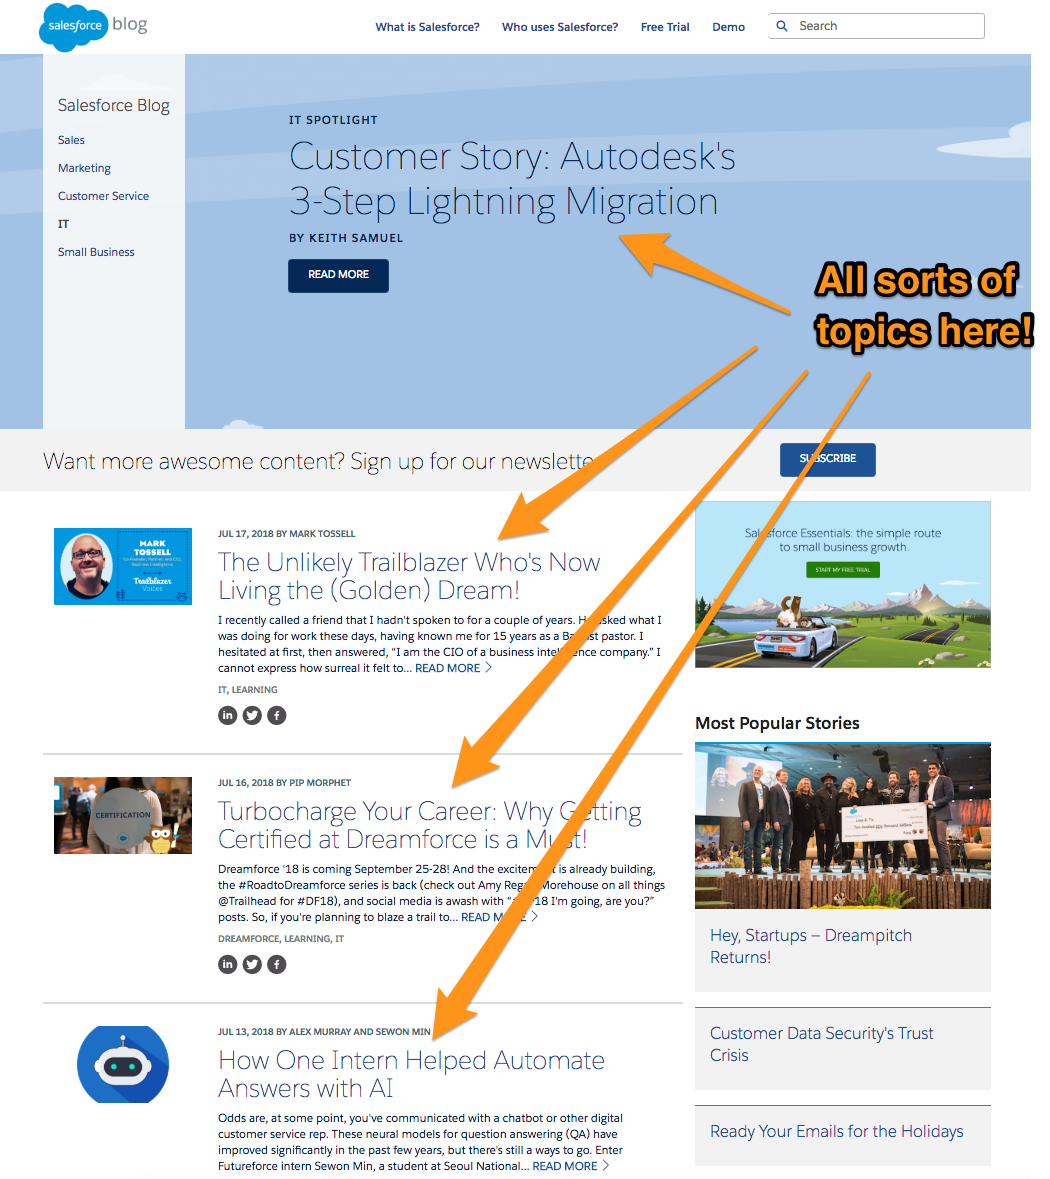 The many topics on Salesforce's blog